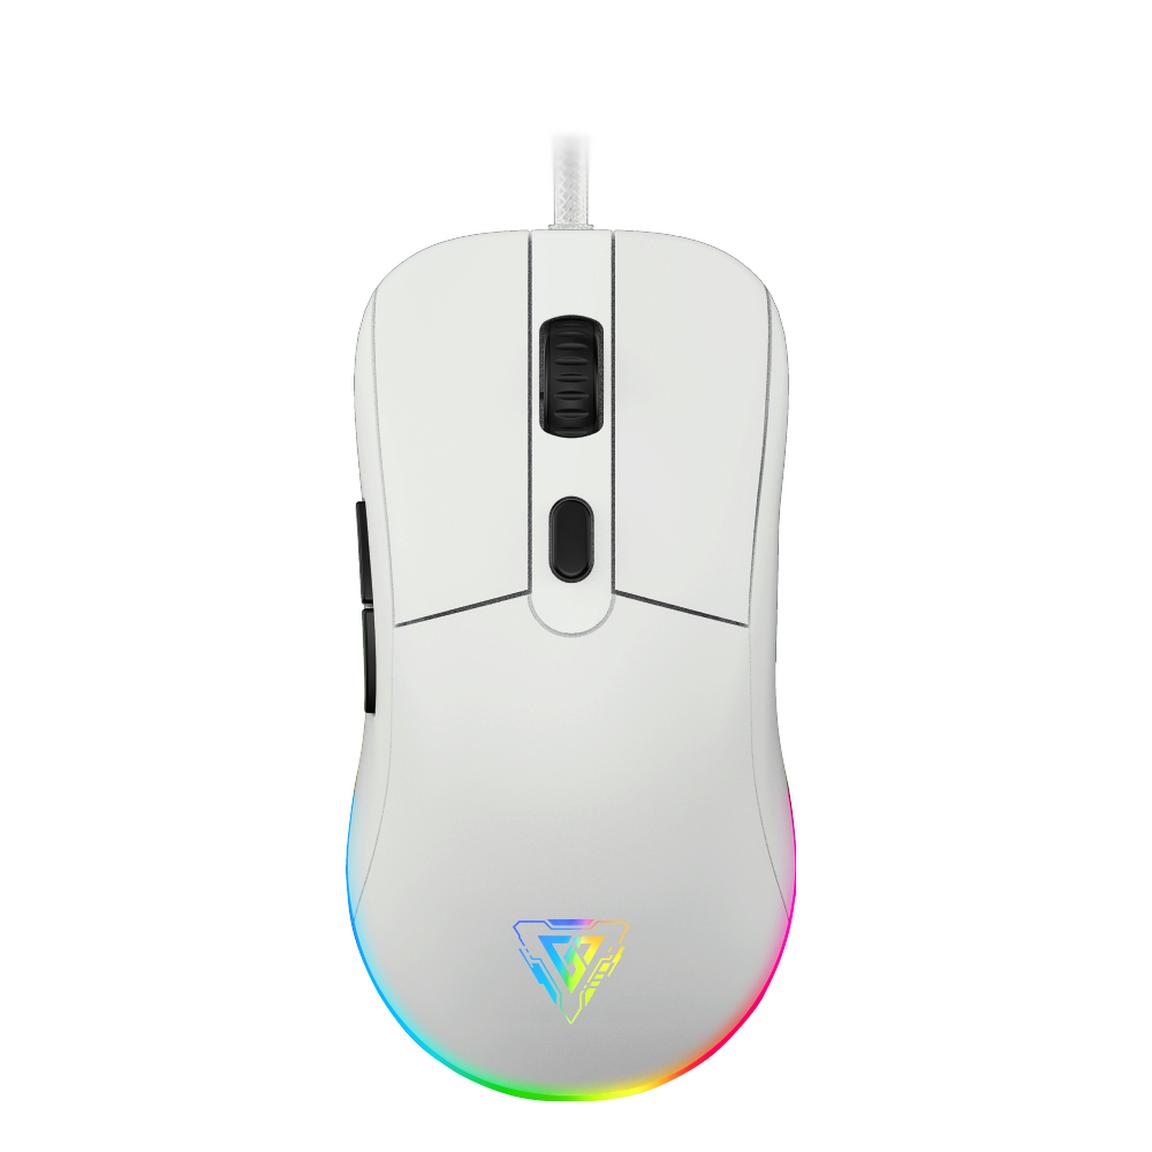 GameStop 6 Button RGB Gaming Mouse - White